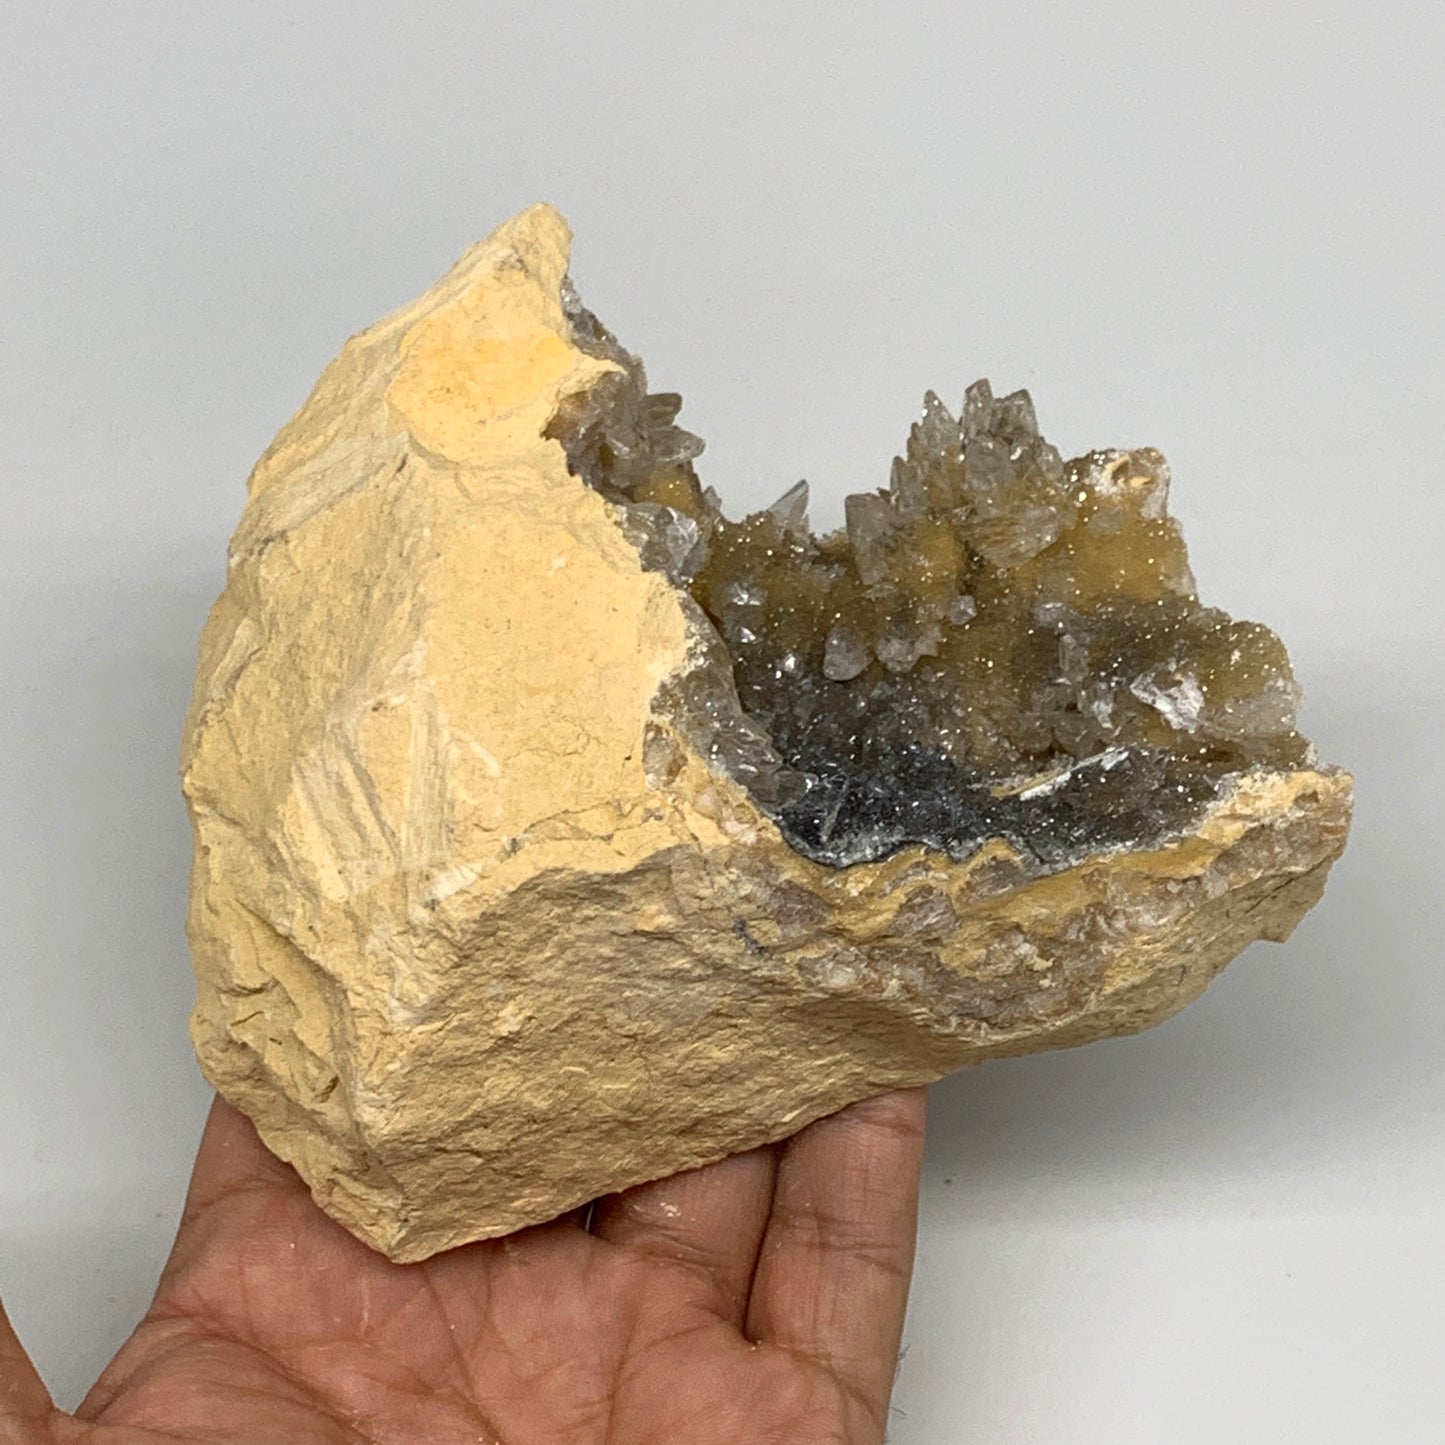 1.26 lbs, 4.7"x4.4"x2.3", Natural Calcite Geode Mineral Specimens @Morocco, B111